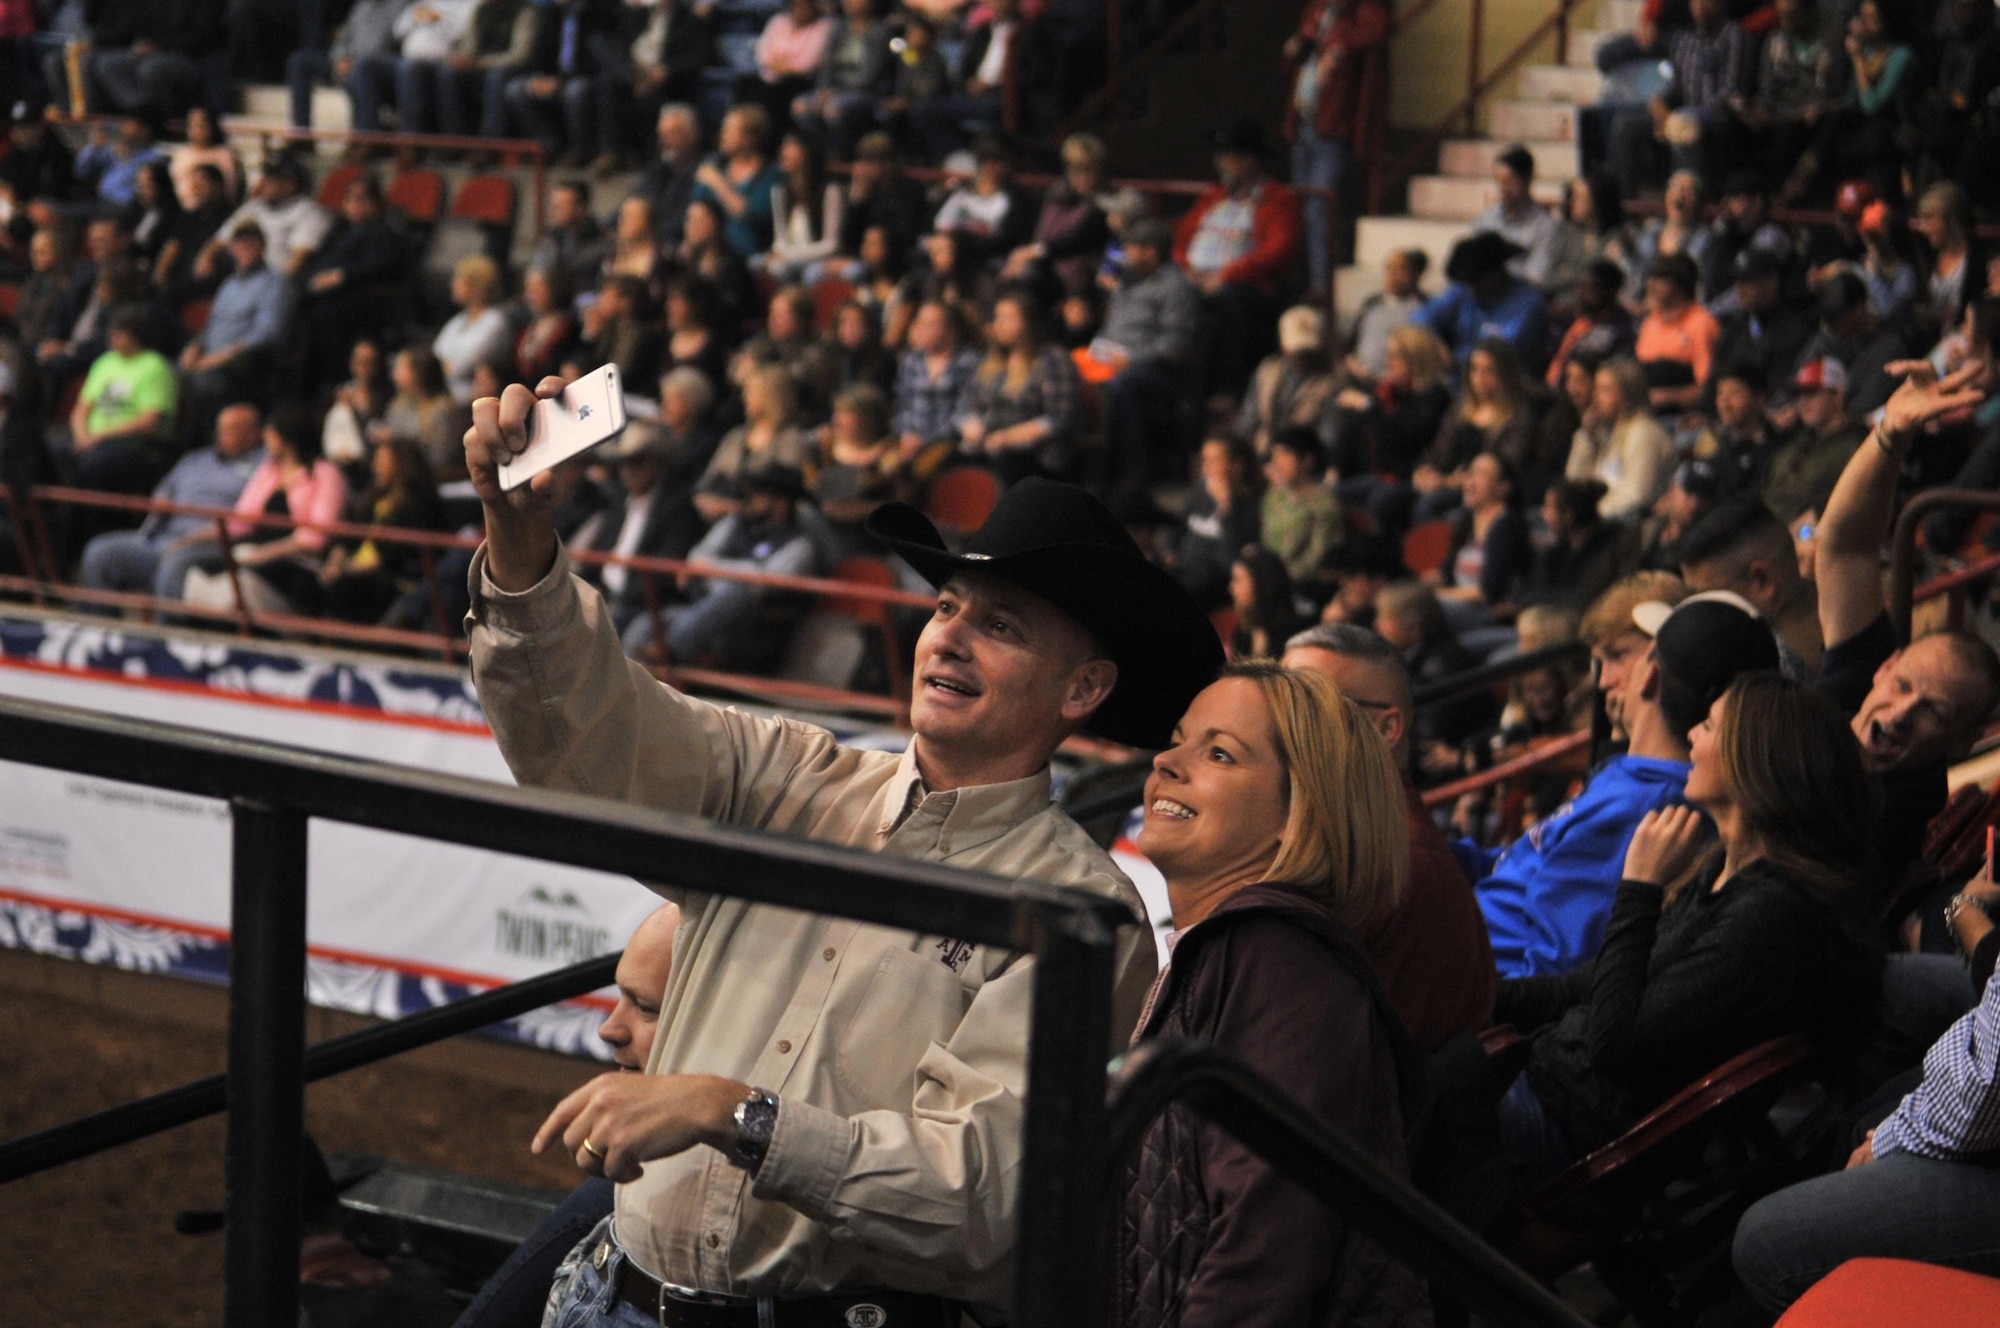 U.S. Air Force Col. Michael Downs, 17th Training Wing Commander, and Chief Master Sgt. Bobbie Riensche, 17th TRW Command Chief, take a selfie before the 85th Annual San Angelo Stock Show and Rodeo Military Appreciation Night at the Foster Communications Coliseum in San Angelo, Texas, Feb. 15, 2017. The rodeo honored military members with special presentations during the night. (U.S. Air Force photo by Staff Sgt. Laura R. McFarlane/Released)